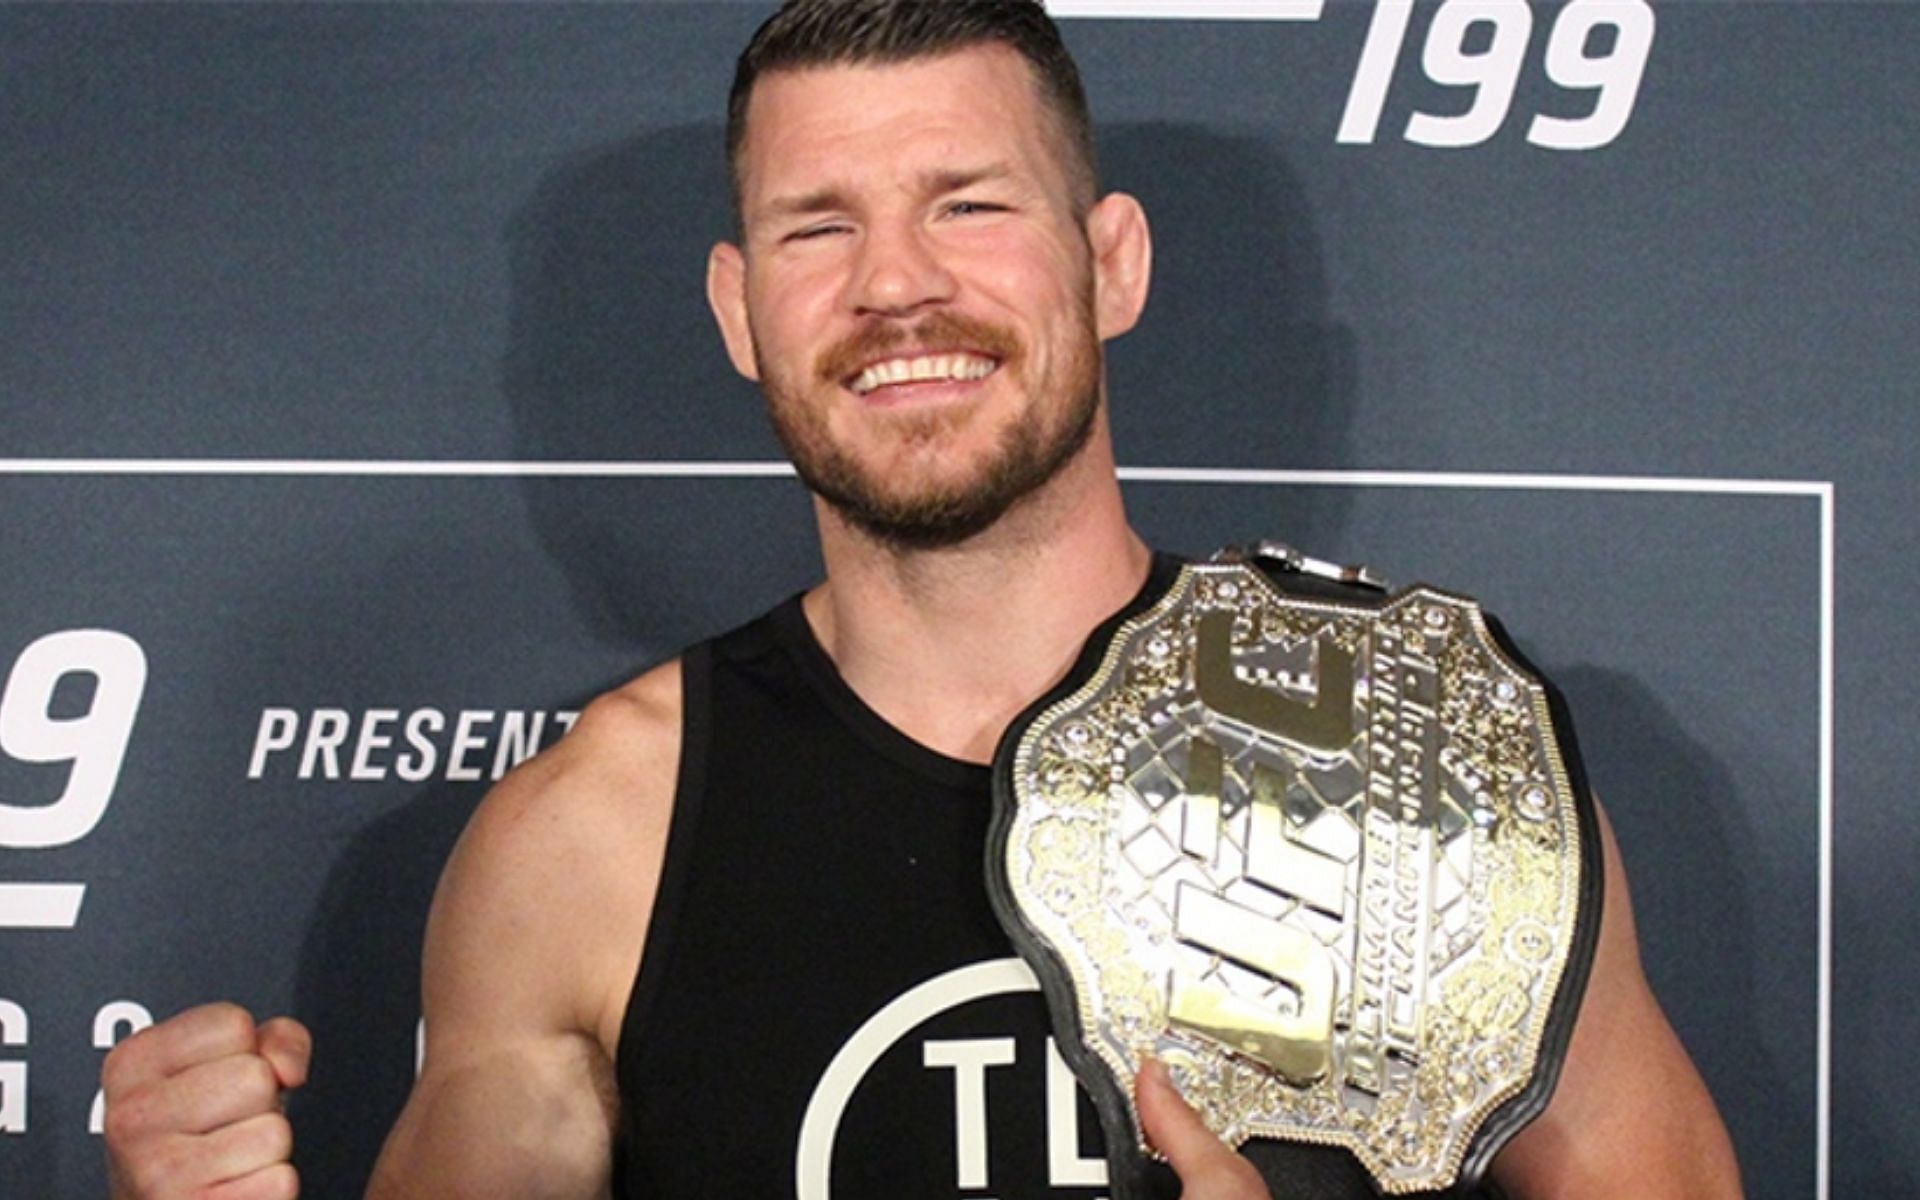 Michael Bisping at the UFC 199 post-fight press conference